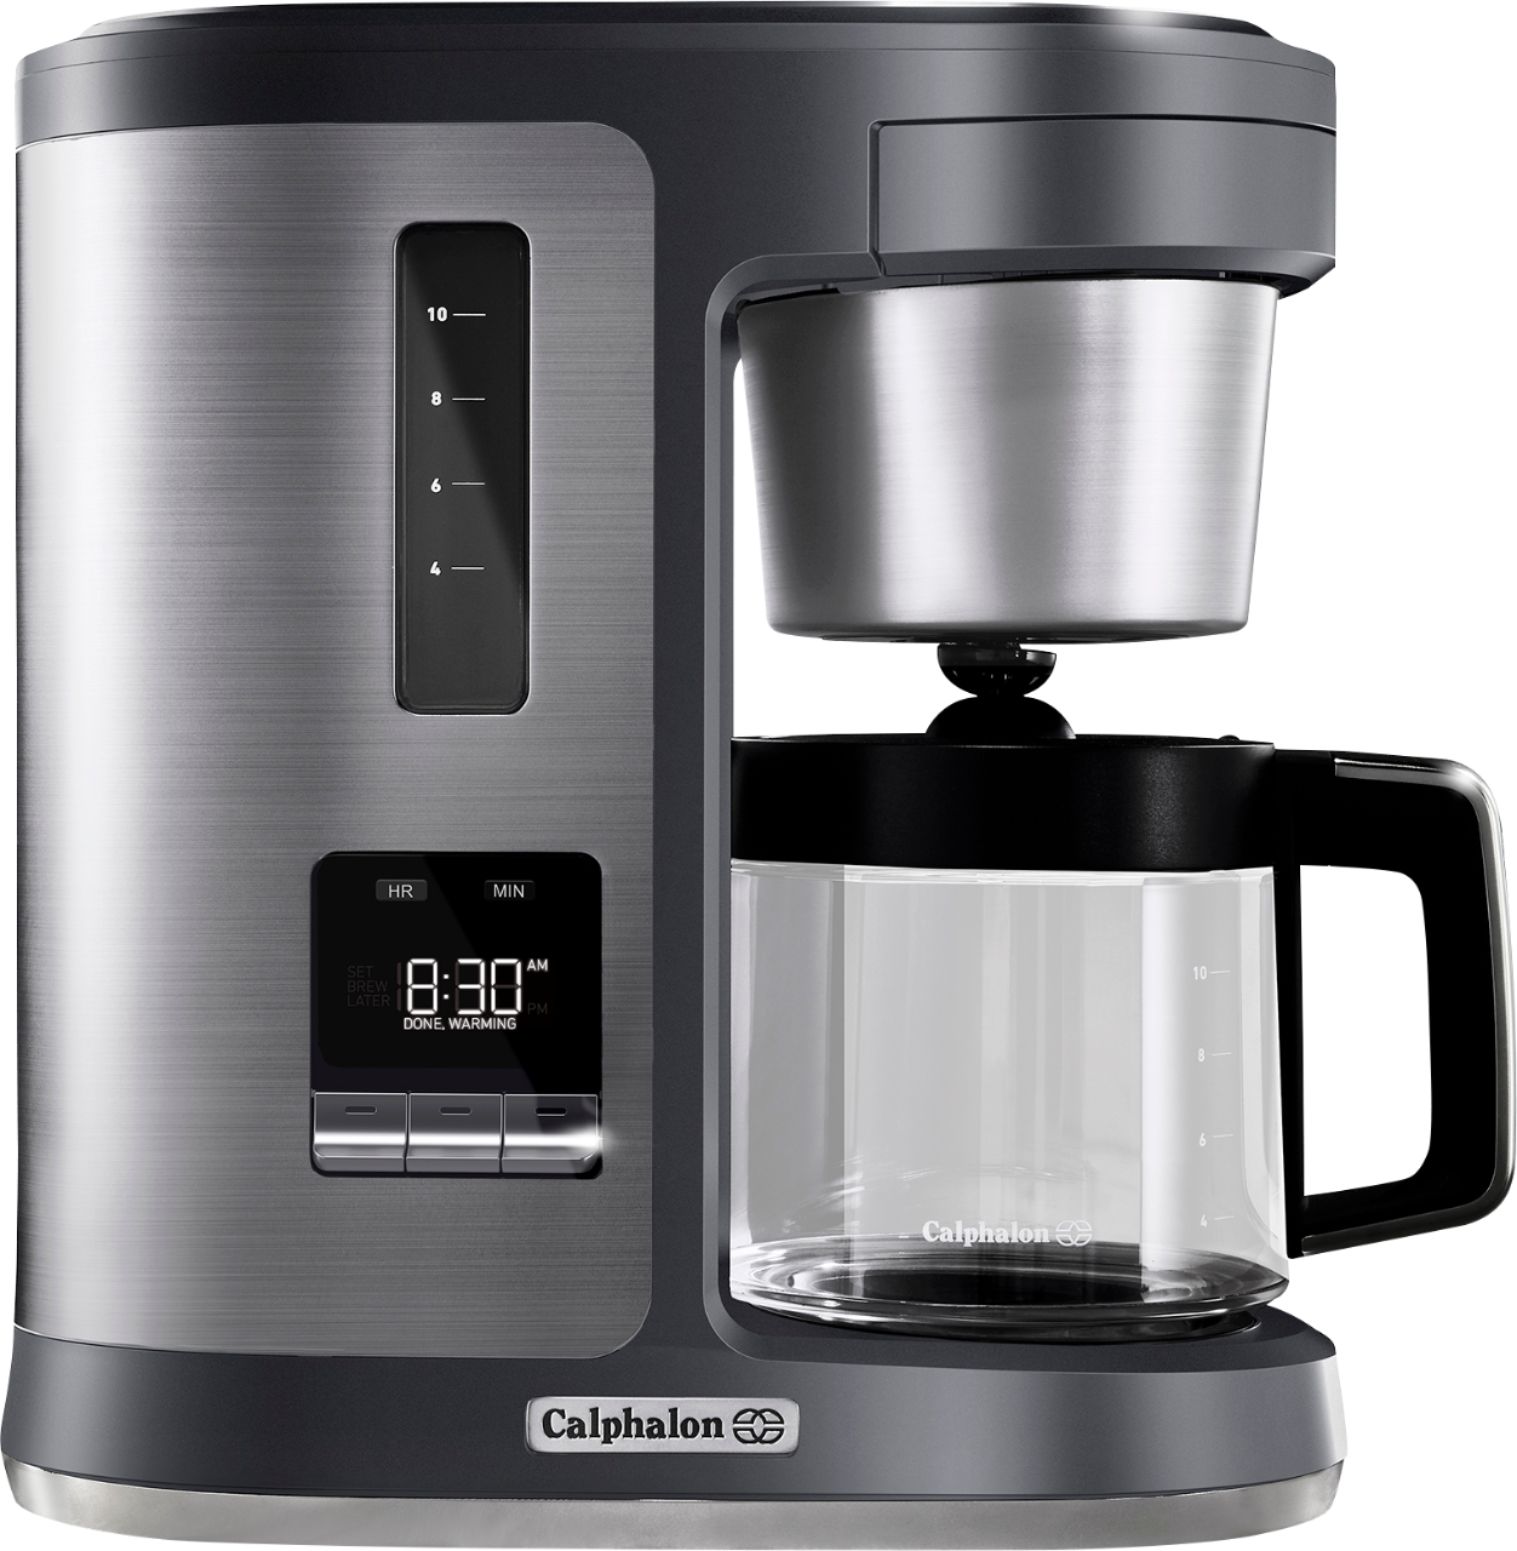 Calphalon 14-Cup Programmable Coffee Maker - Stainless Steel Drip Coffee Maker with Glass Carafe High Performance Heating